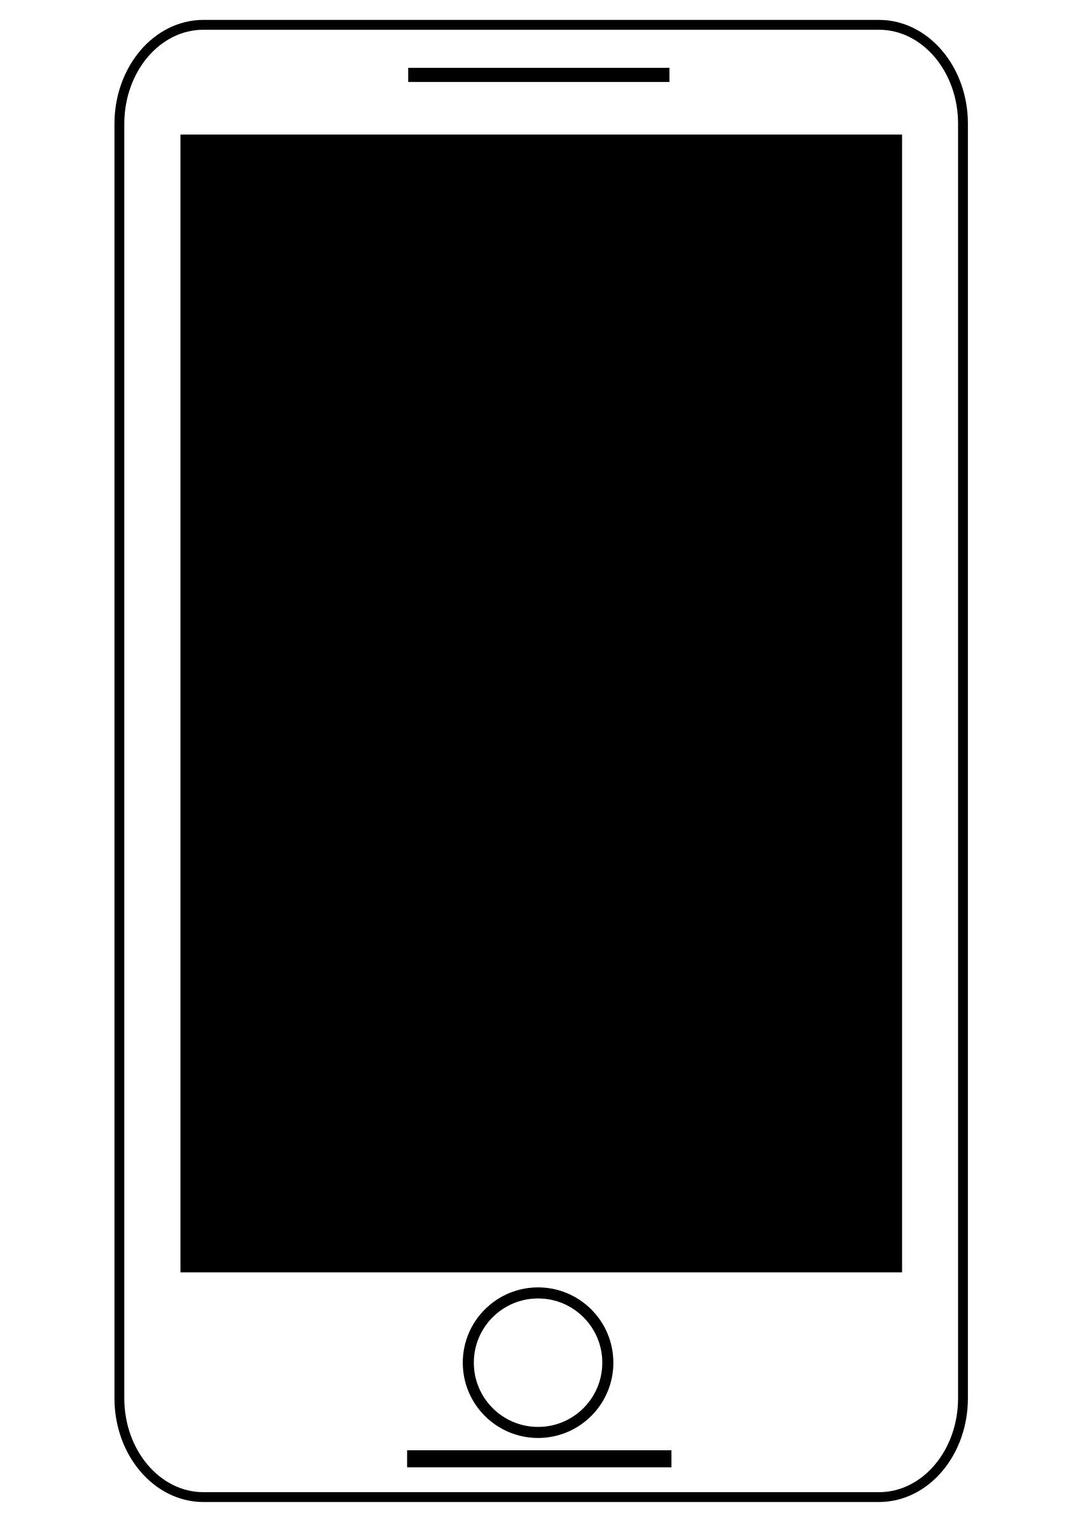 Smartphone - Tablet Black And White Free Clipart Icon png transparent